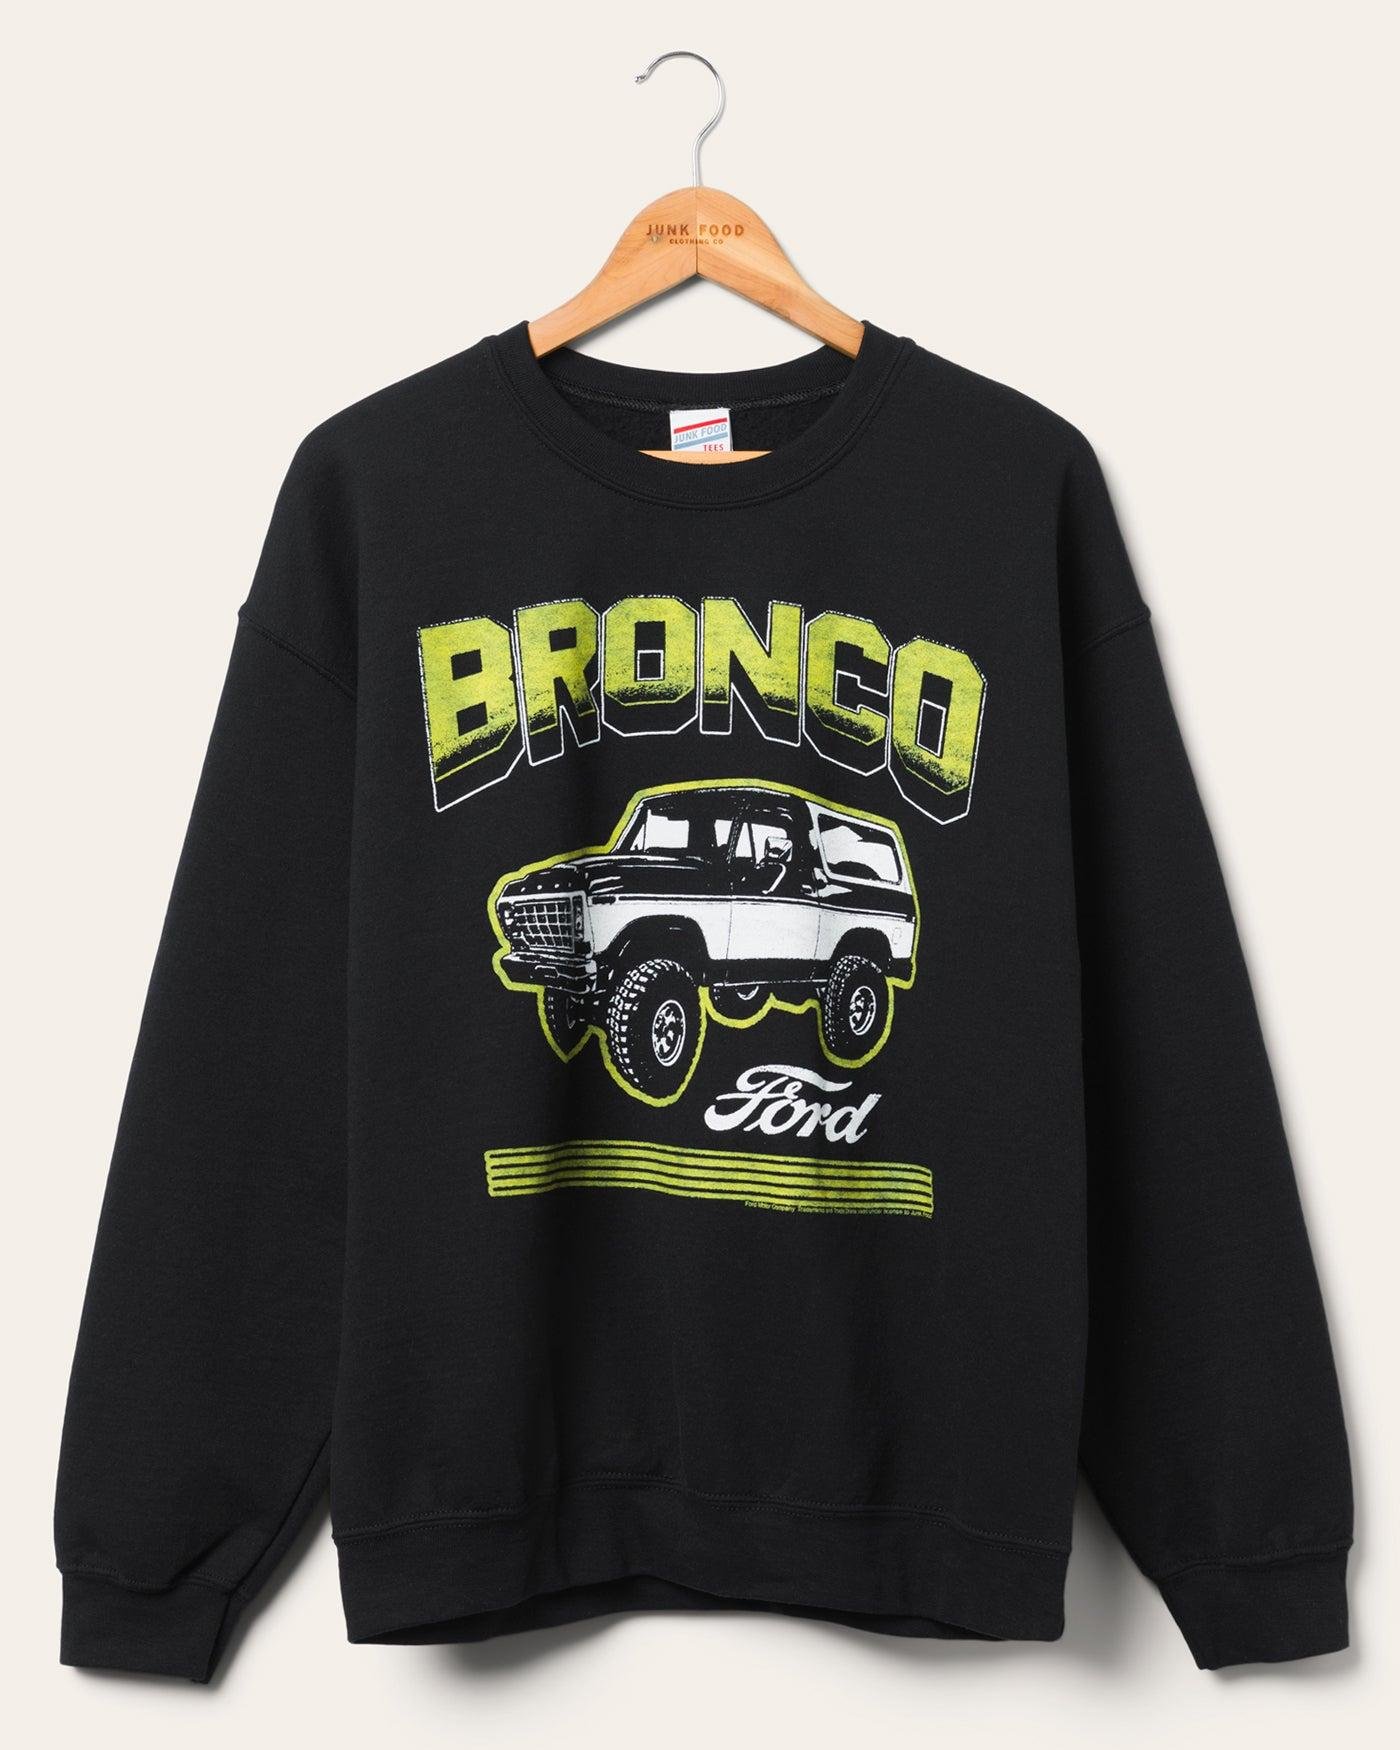 Junk Food Clothing Bronco Powered By Ford Flea Market Fleece Pullover by JUNK FOOD CLOTHING